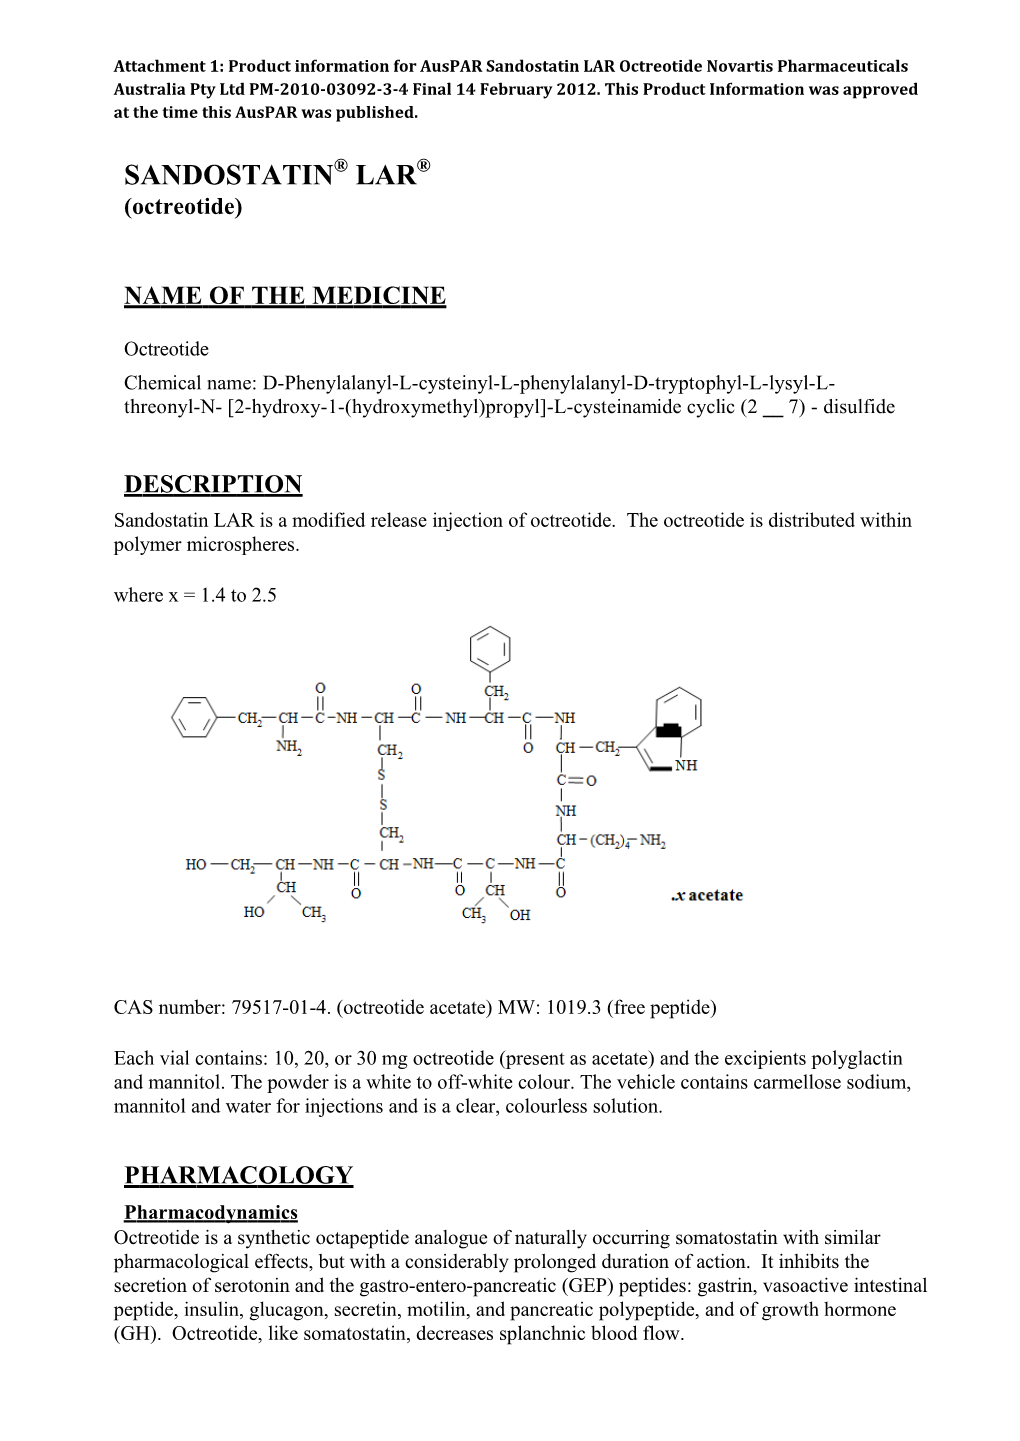 Attachment 1. Product Information for Octreotide